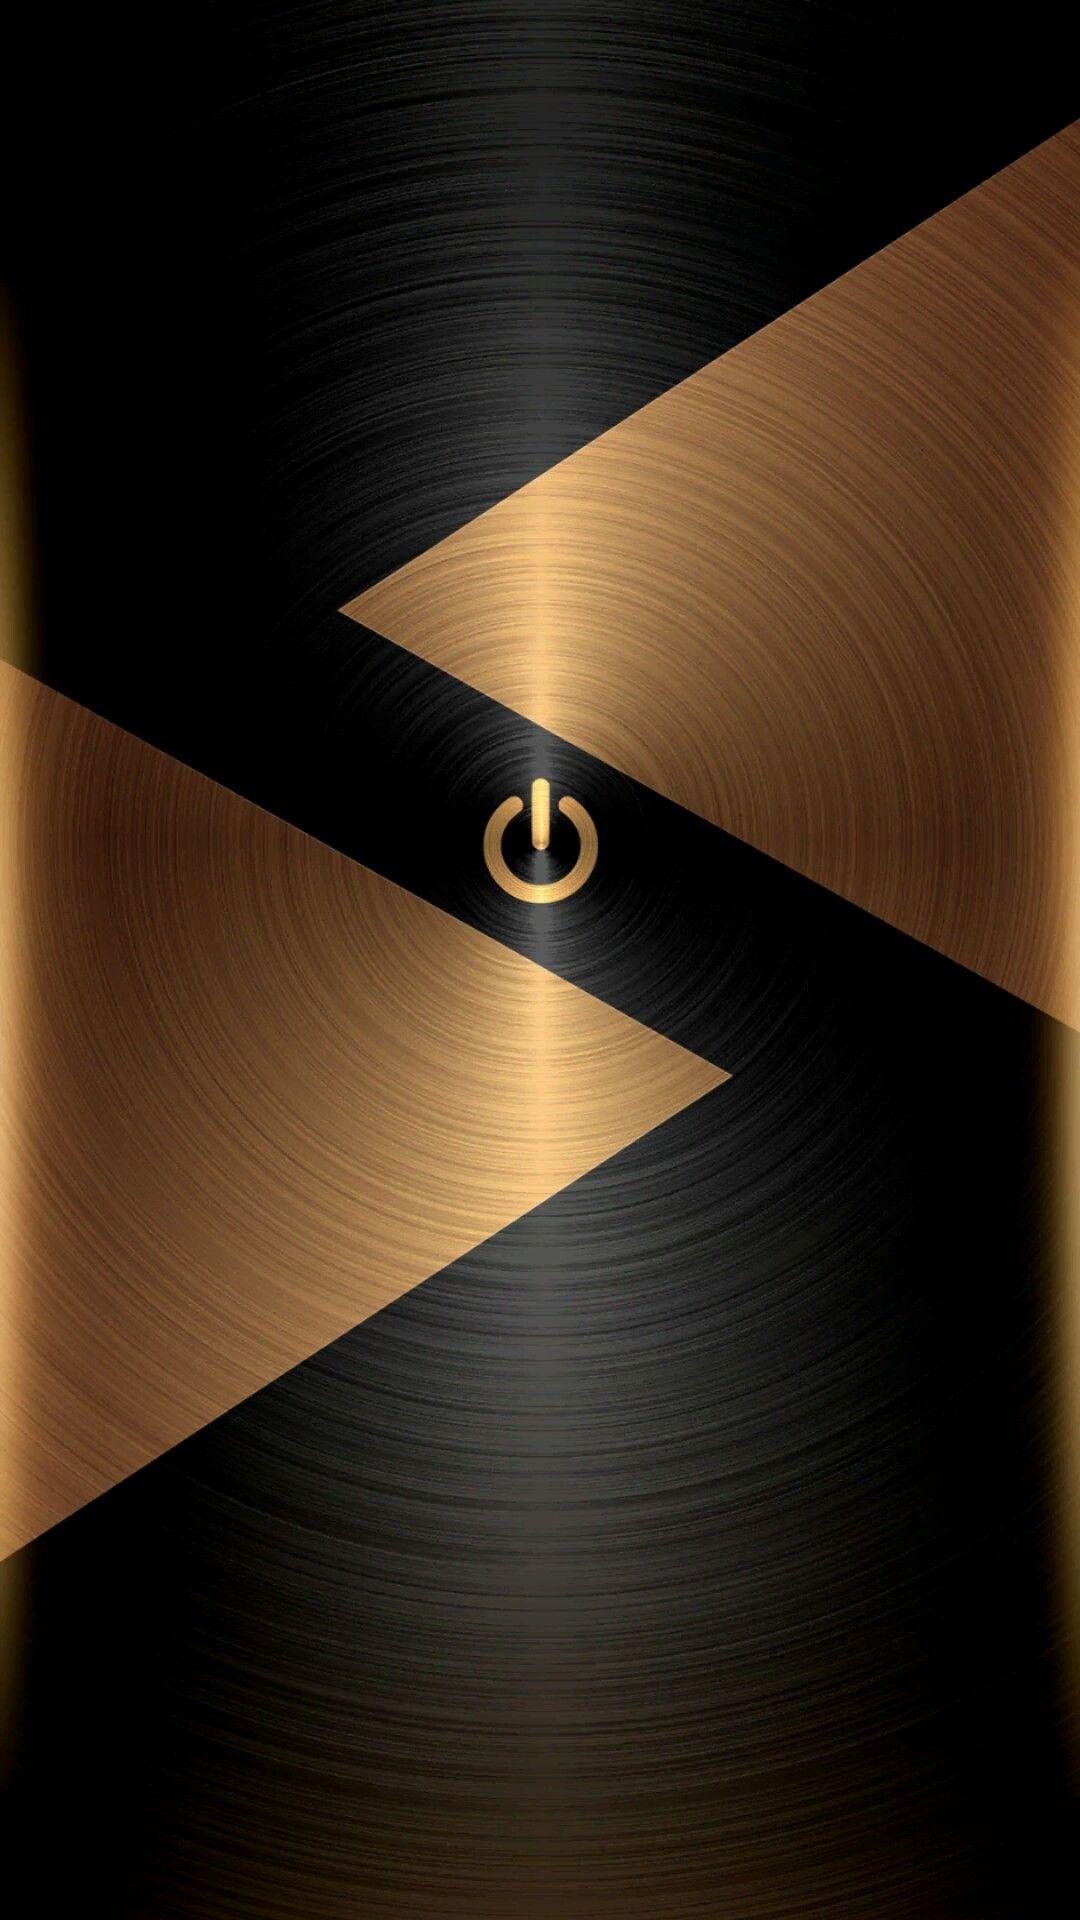 Black and Gold Wallpaper. Gold wallpaper, Gold wallpaper android, Wallpaper edge